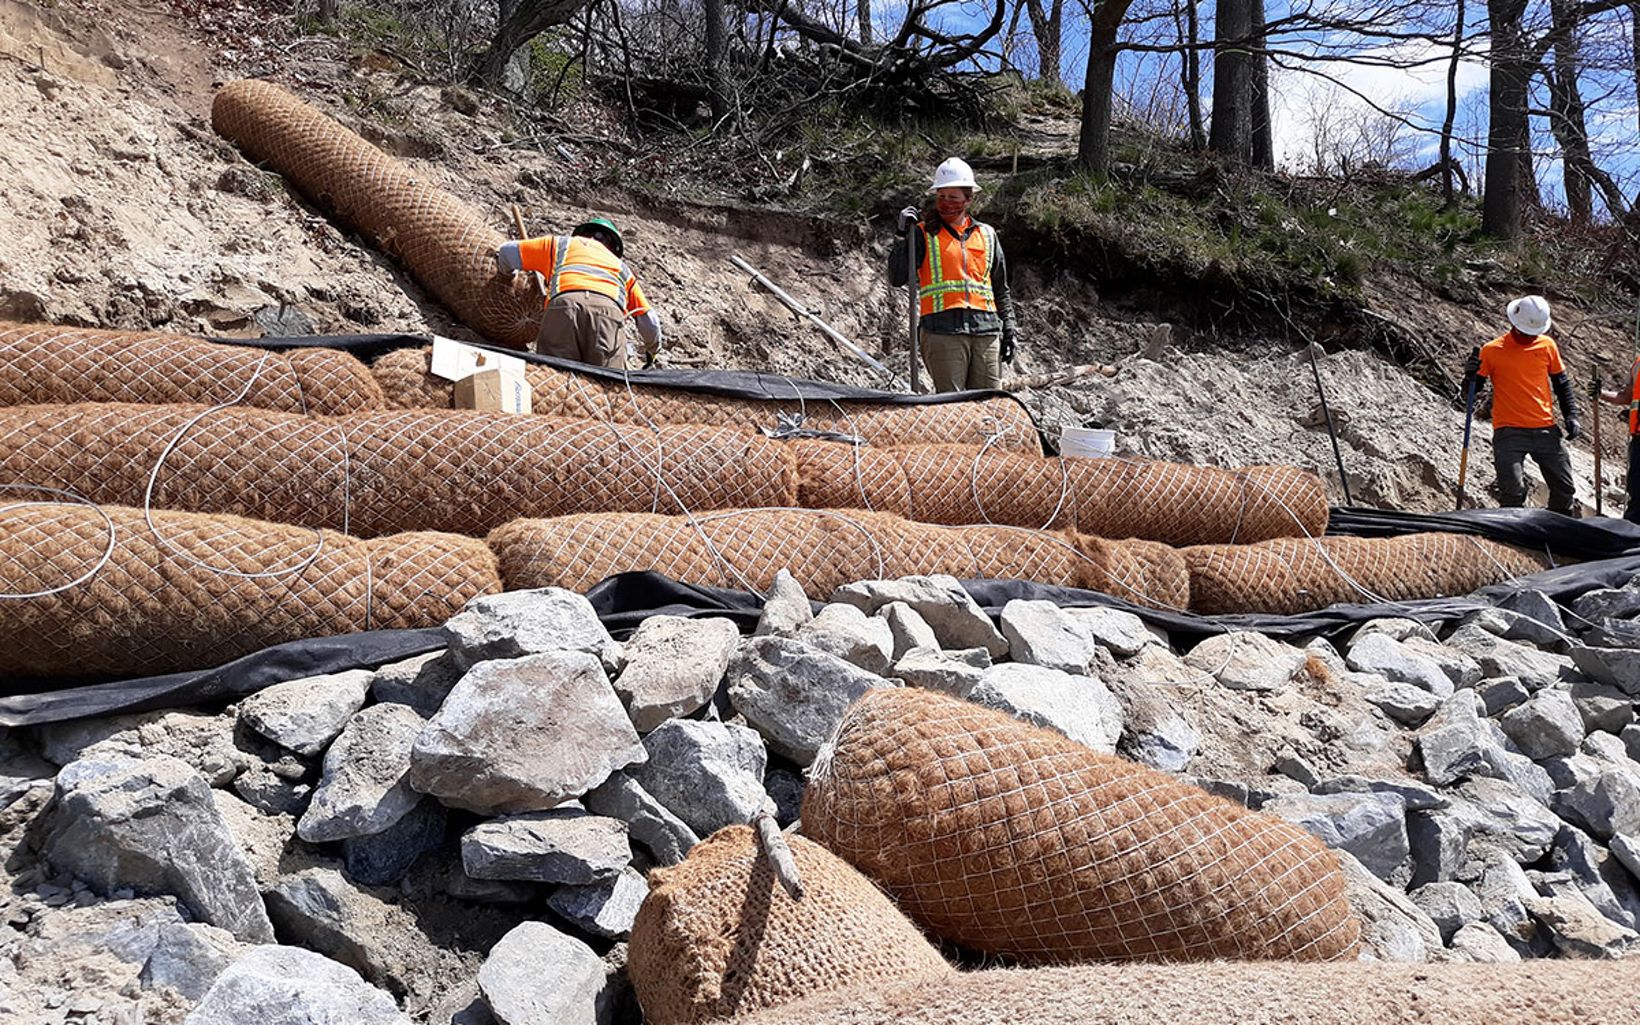 Several workers in orange vests tie coir logs to a rocky shorebank using metal cables.